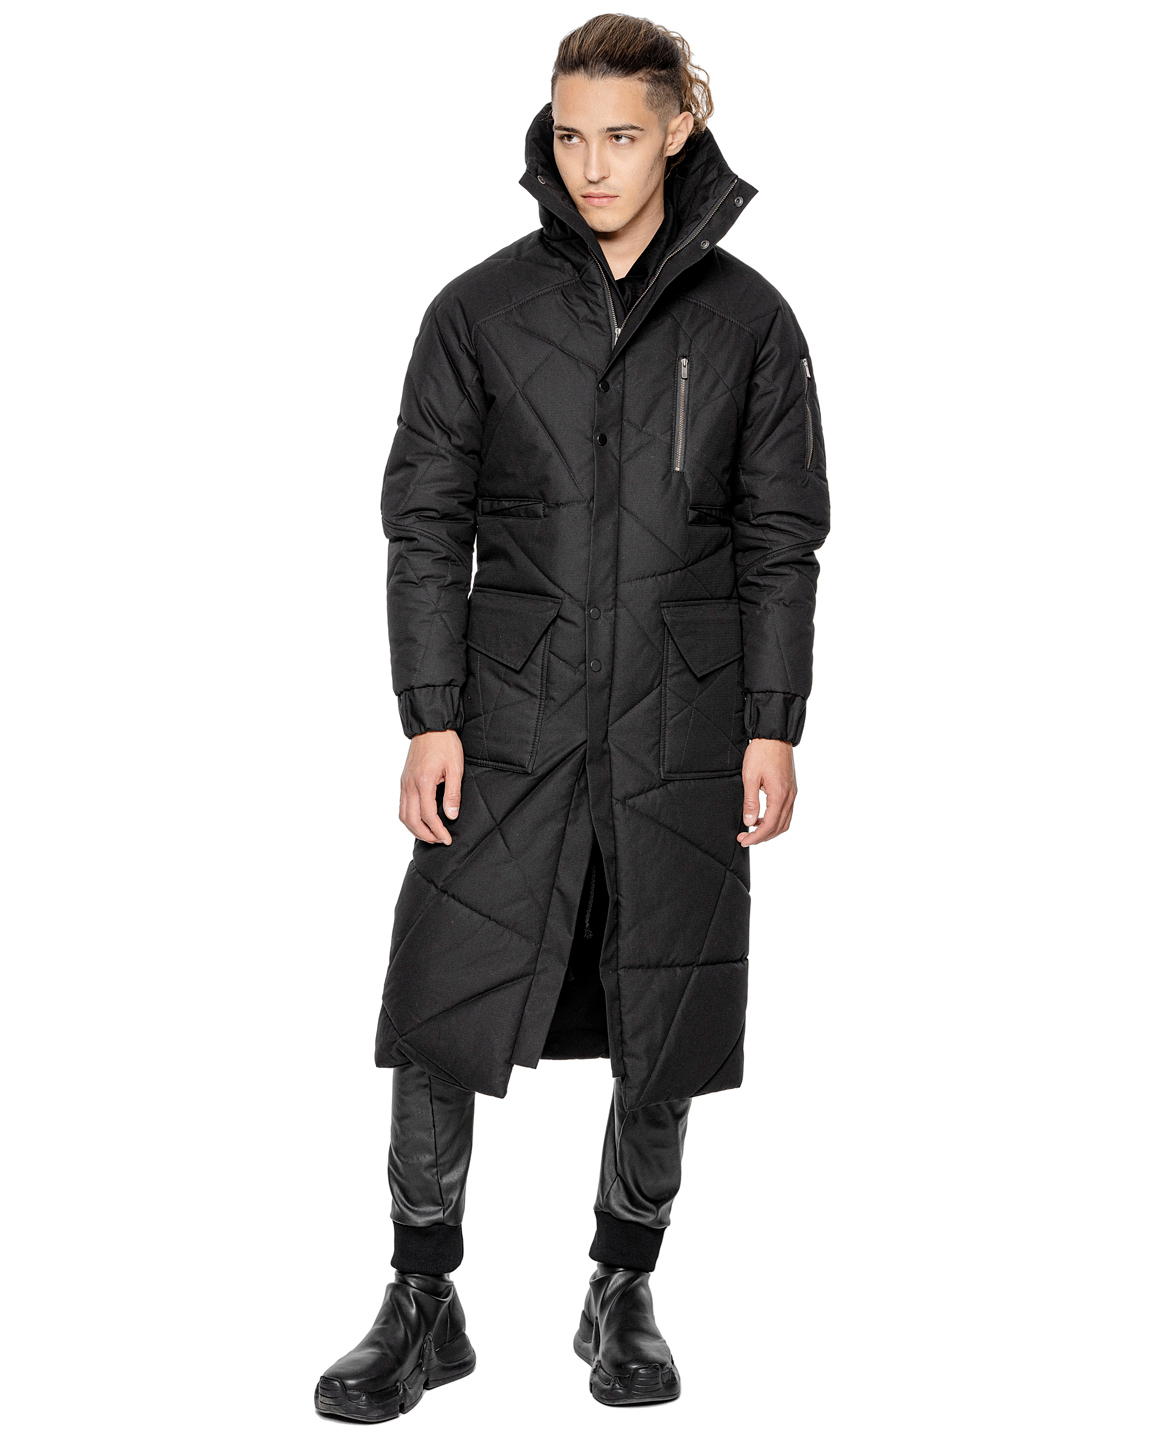 Aspect Quilted Multi-Pocket Coat